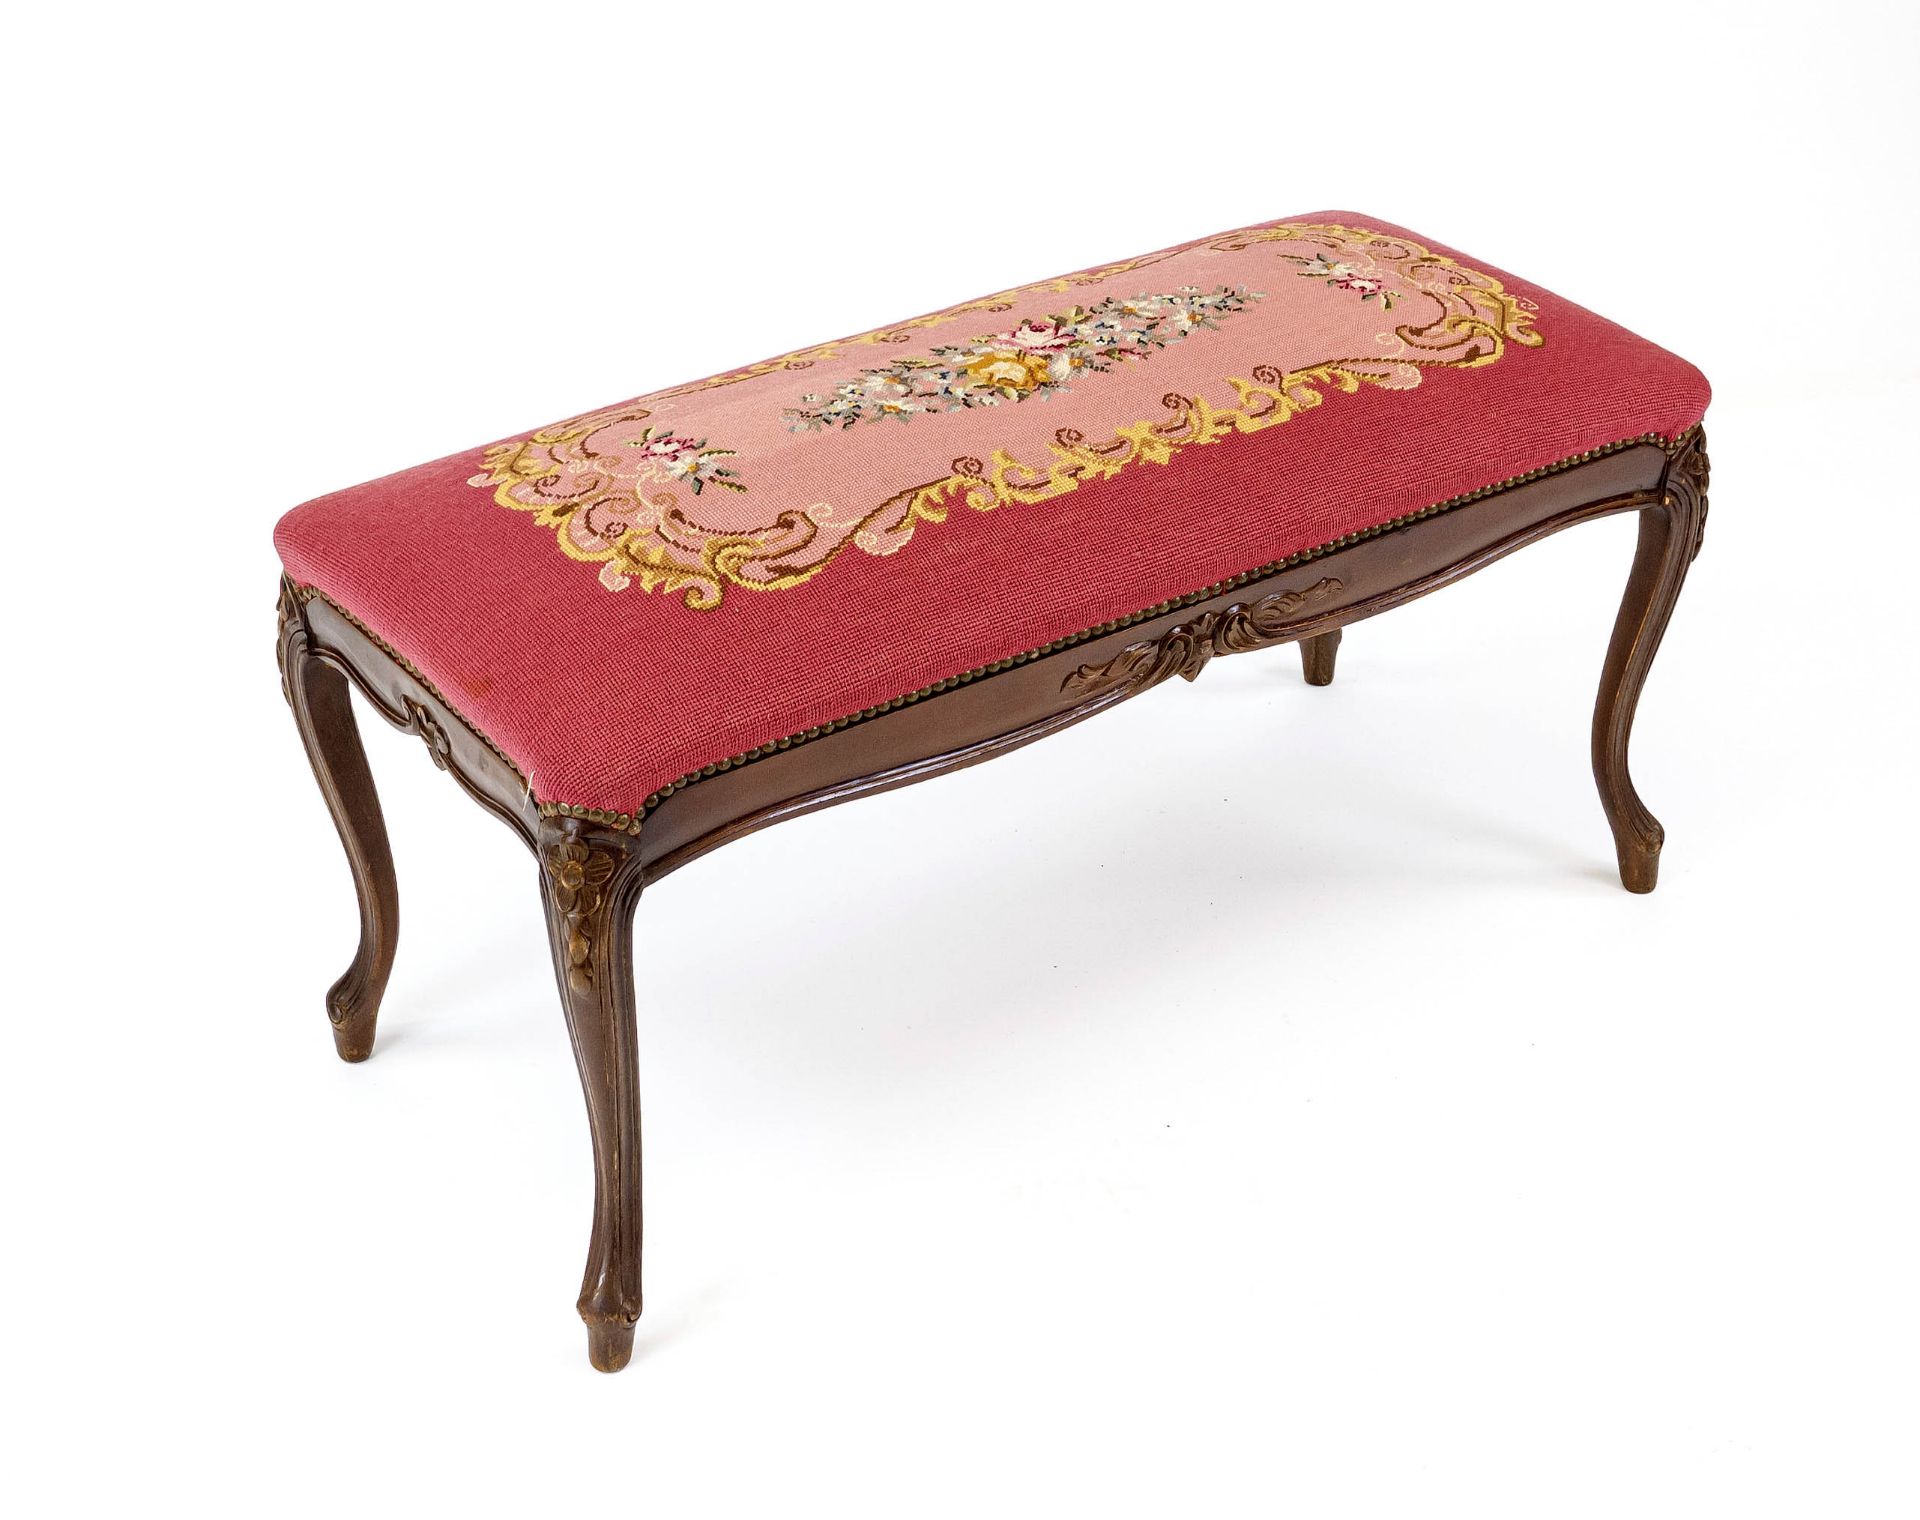 Bench, 20th century, carved walnut-colored wood frame, embroidered cover, 45 x 90 x 45 cm